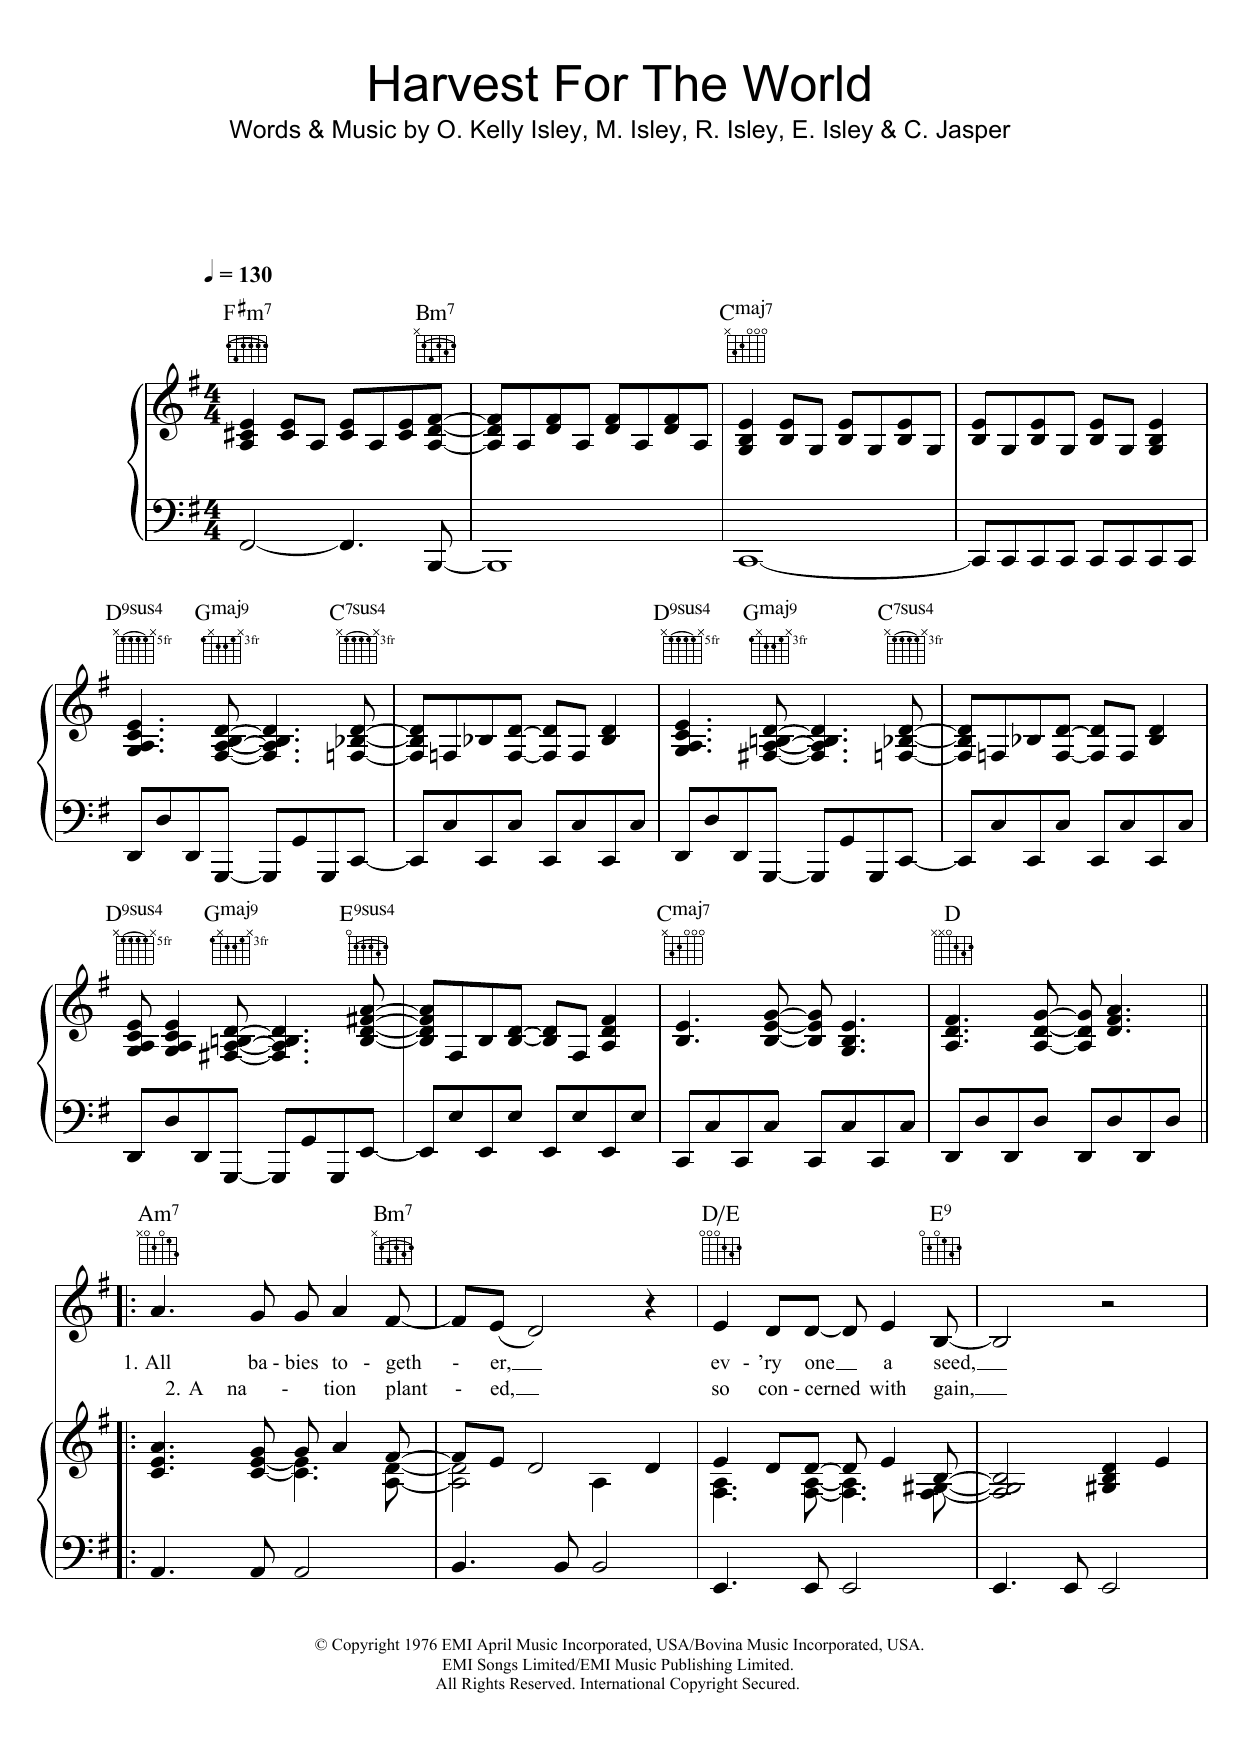 Download The Isley Brothers Harvest For The World Sheet Music